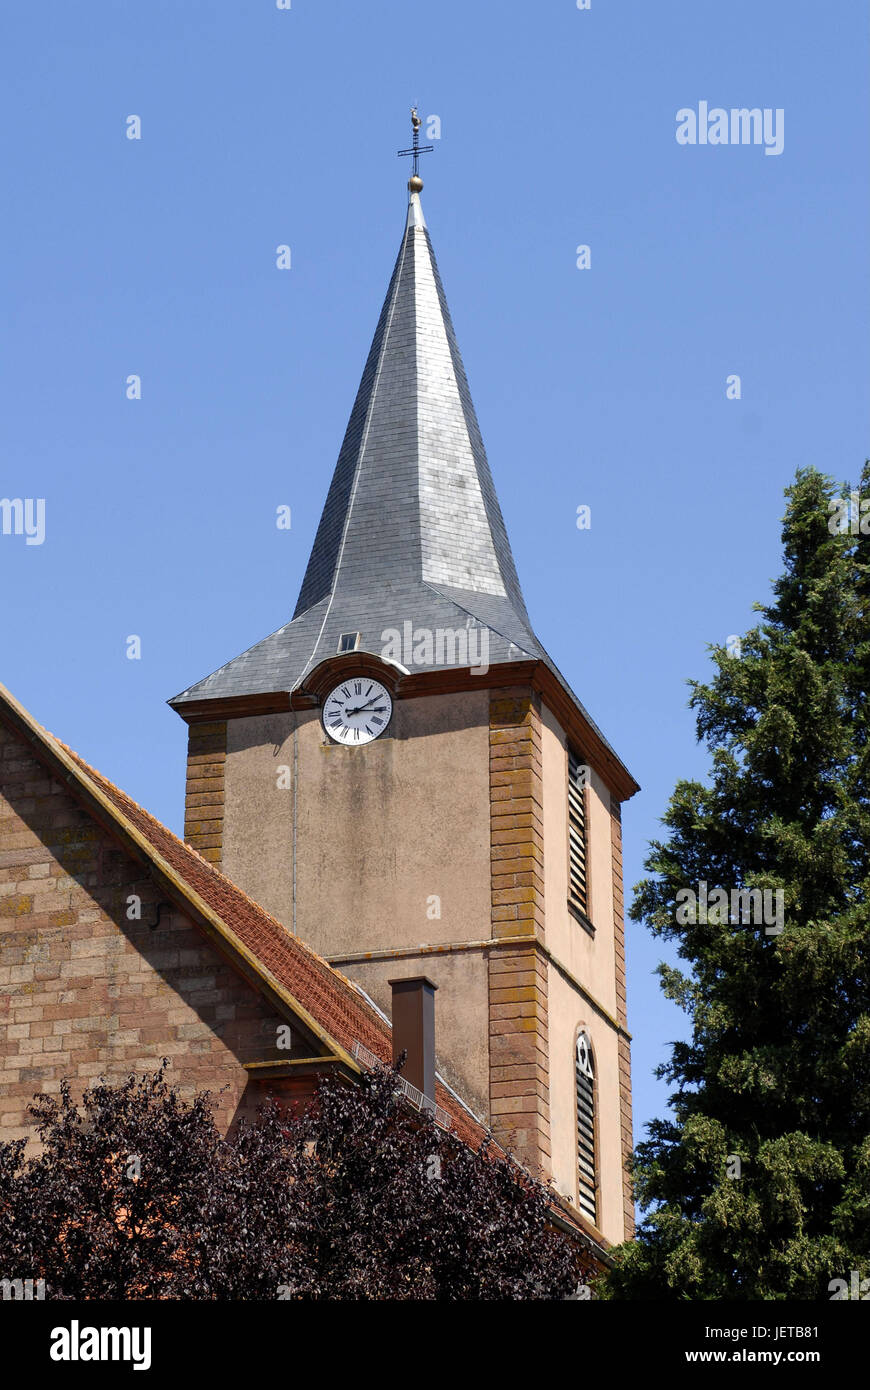 France, Alsace, Bas-Rhin, Kirrwiller, church, detail, place, faith, religion, Christianity, Protestant, church, sacred construction, architecture, steeple, clock, cross, sky, blue, cloudless, outside, trees, Stock Photo